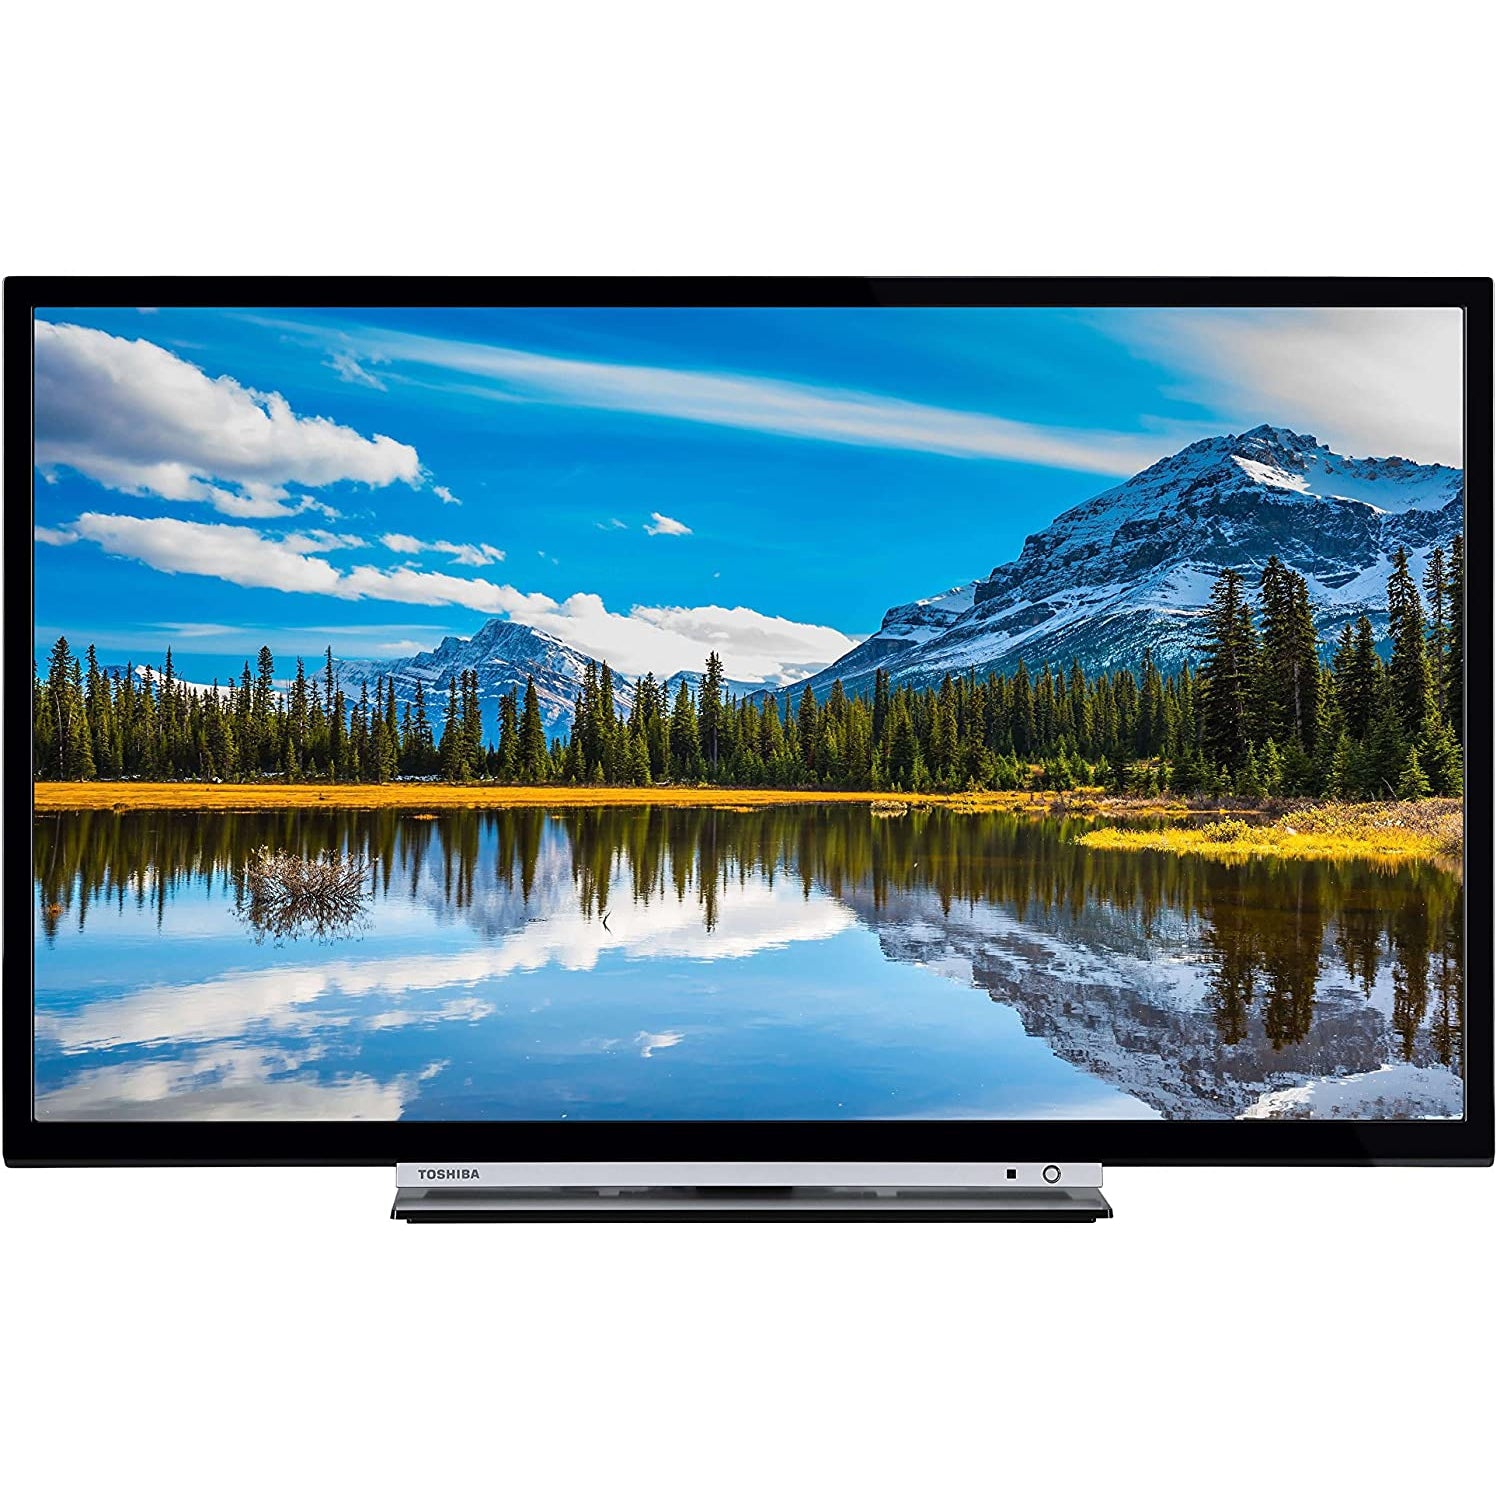 Toshiba 24W3863DB LED HD Ready 720p Smart TV, 24" with Freeview HD, Black - (Missing Stand)